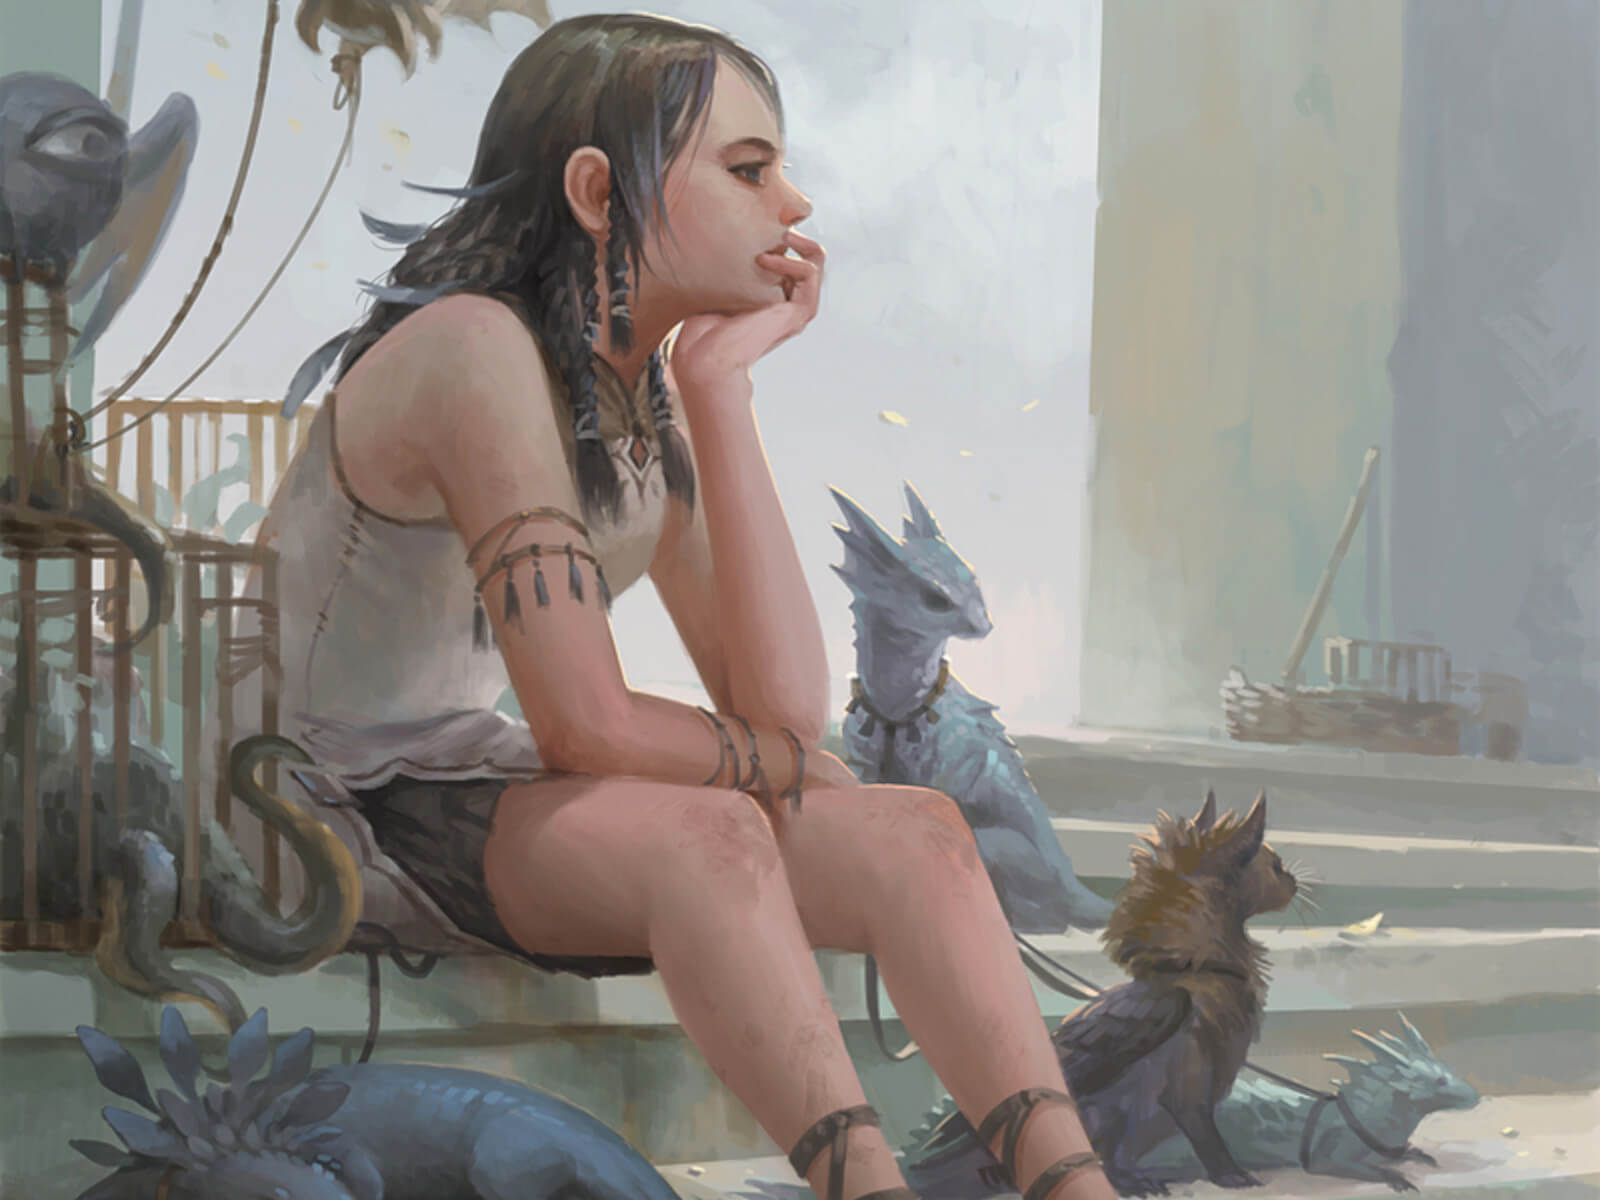 A girl sits on a flight of stairs with several small mythological creatures beside her.